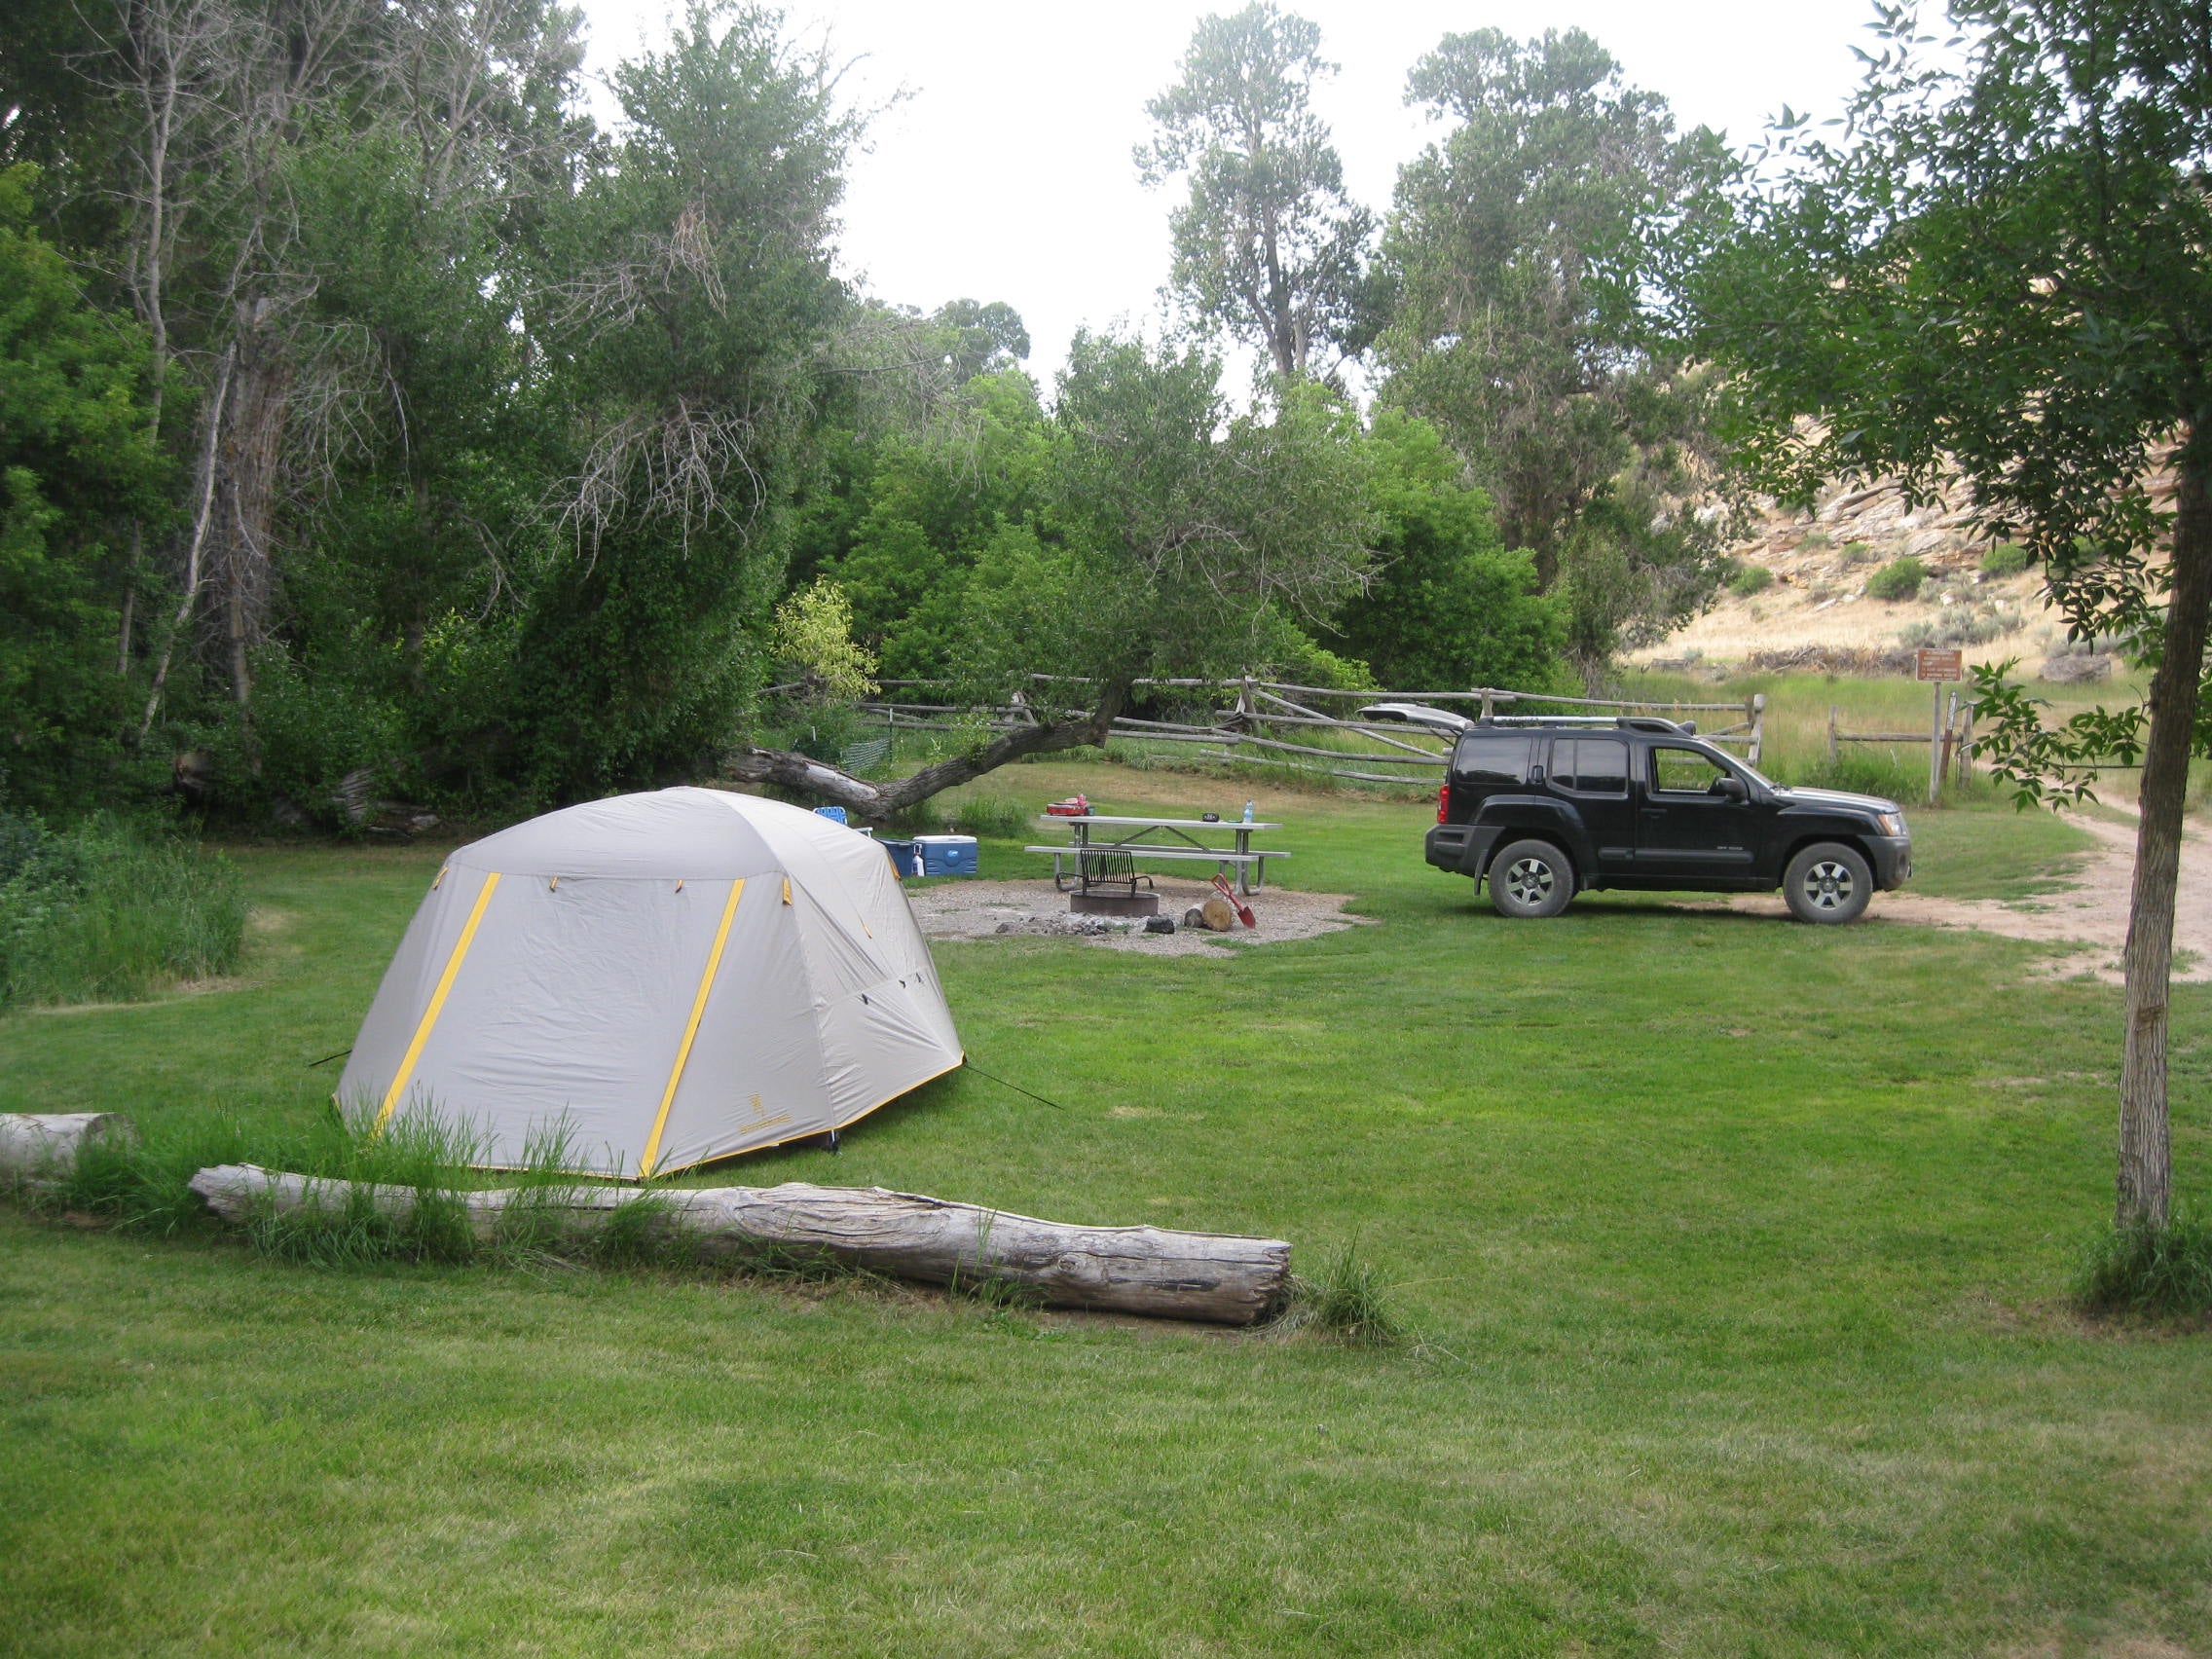 Northern-most campsite in park taken July 2014.